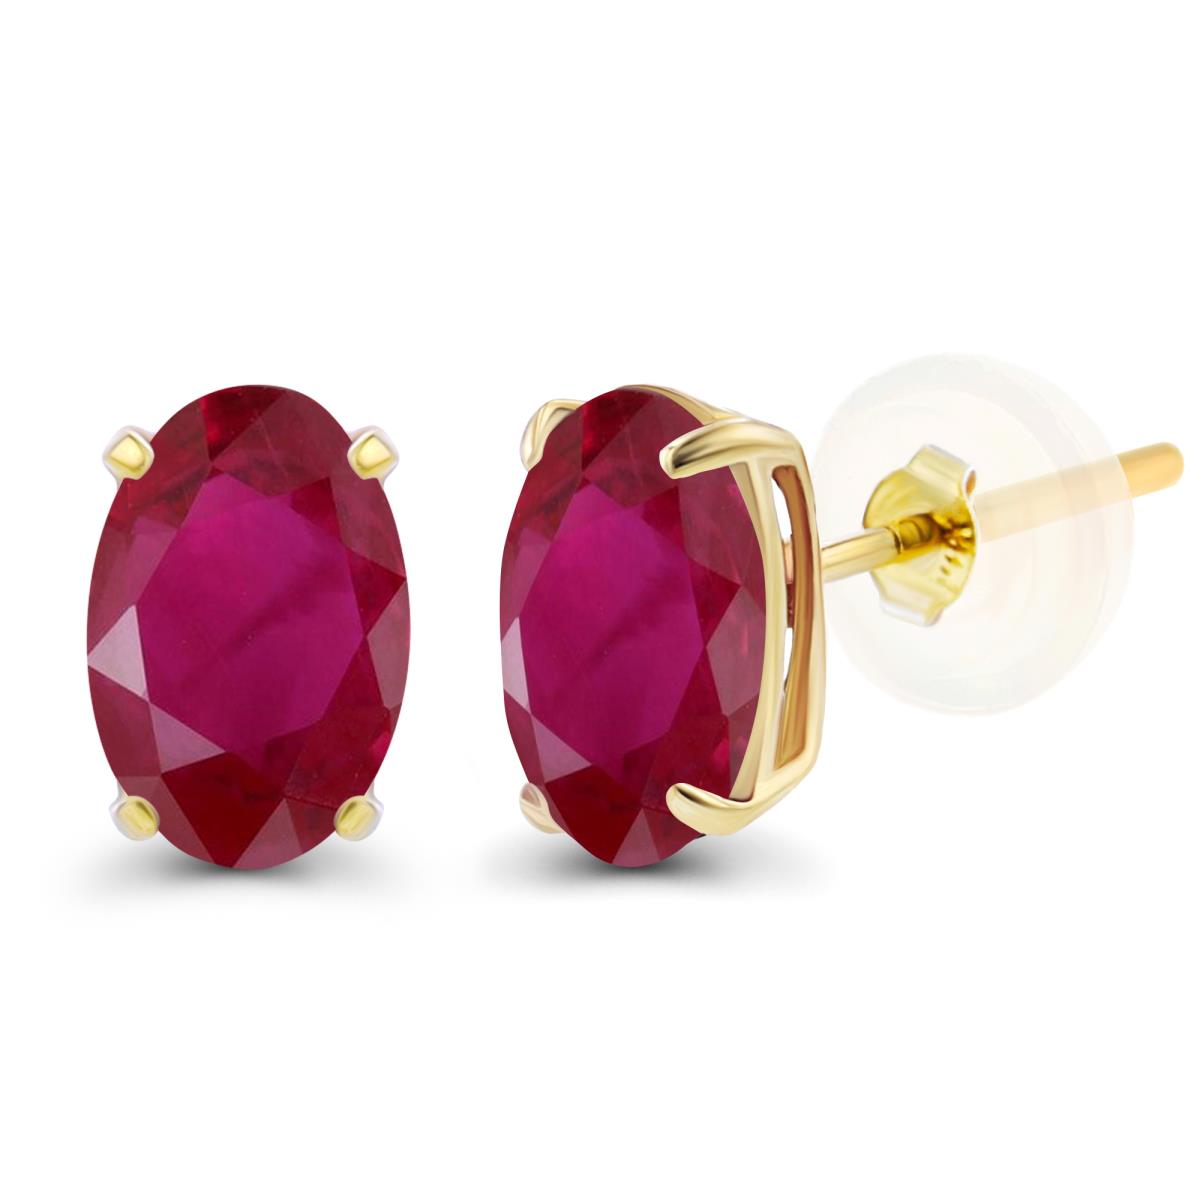 14K Yellow Gold 5x3mm Oval Ruby Basket Stud Earrings with Silicone Backs